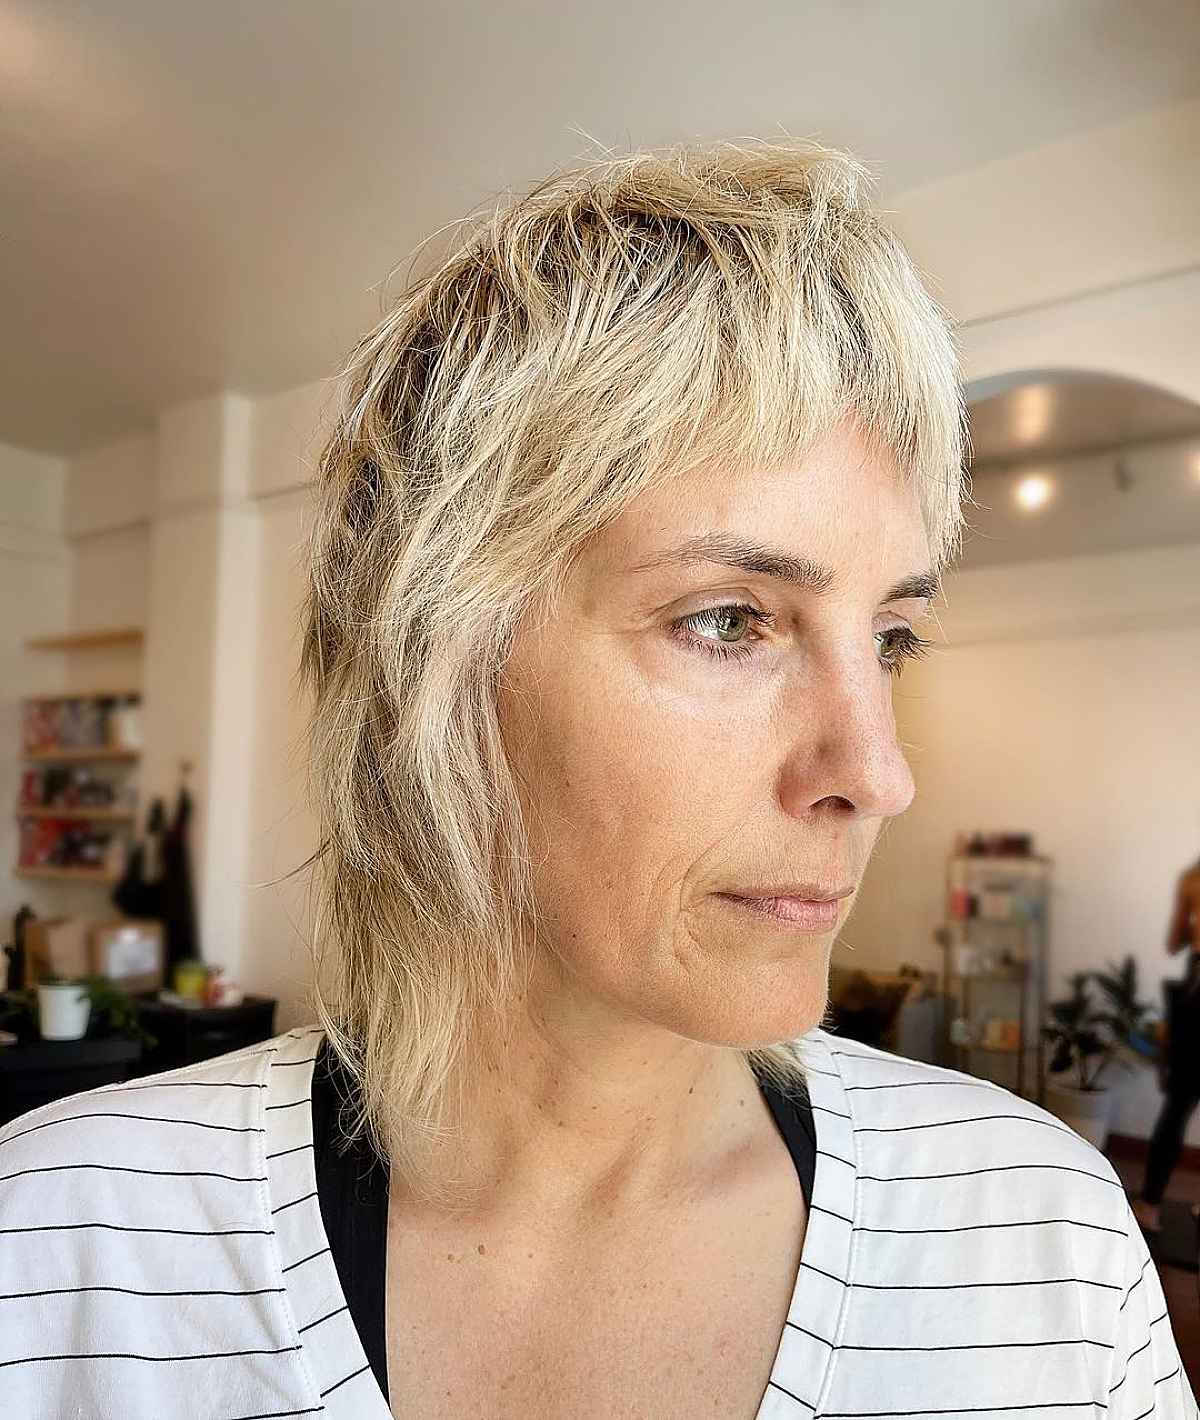 Messy Shag Cut for Older Women who are Low-Maintenance